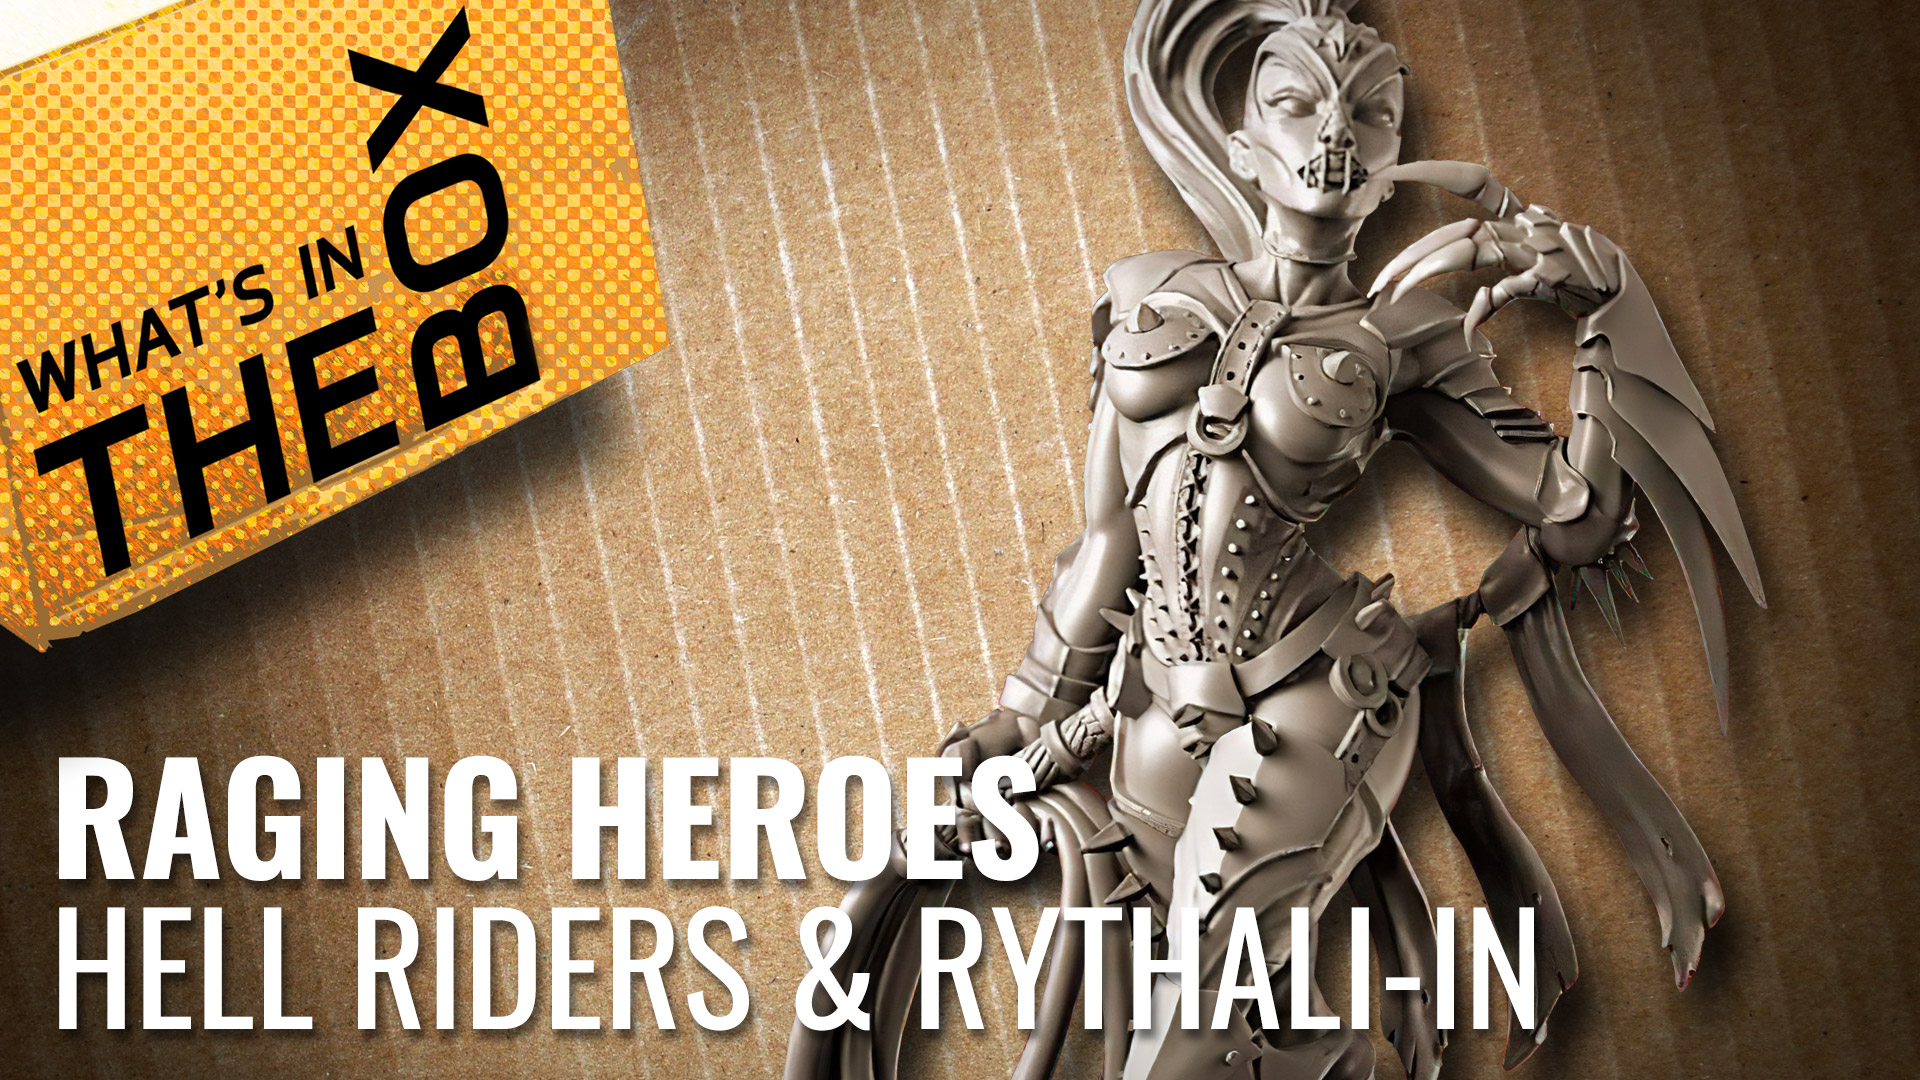 Unboxing---Hell-Riders- -Rythali-coverimage-V2